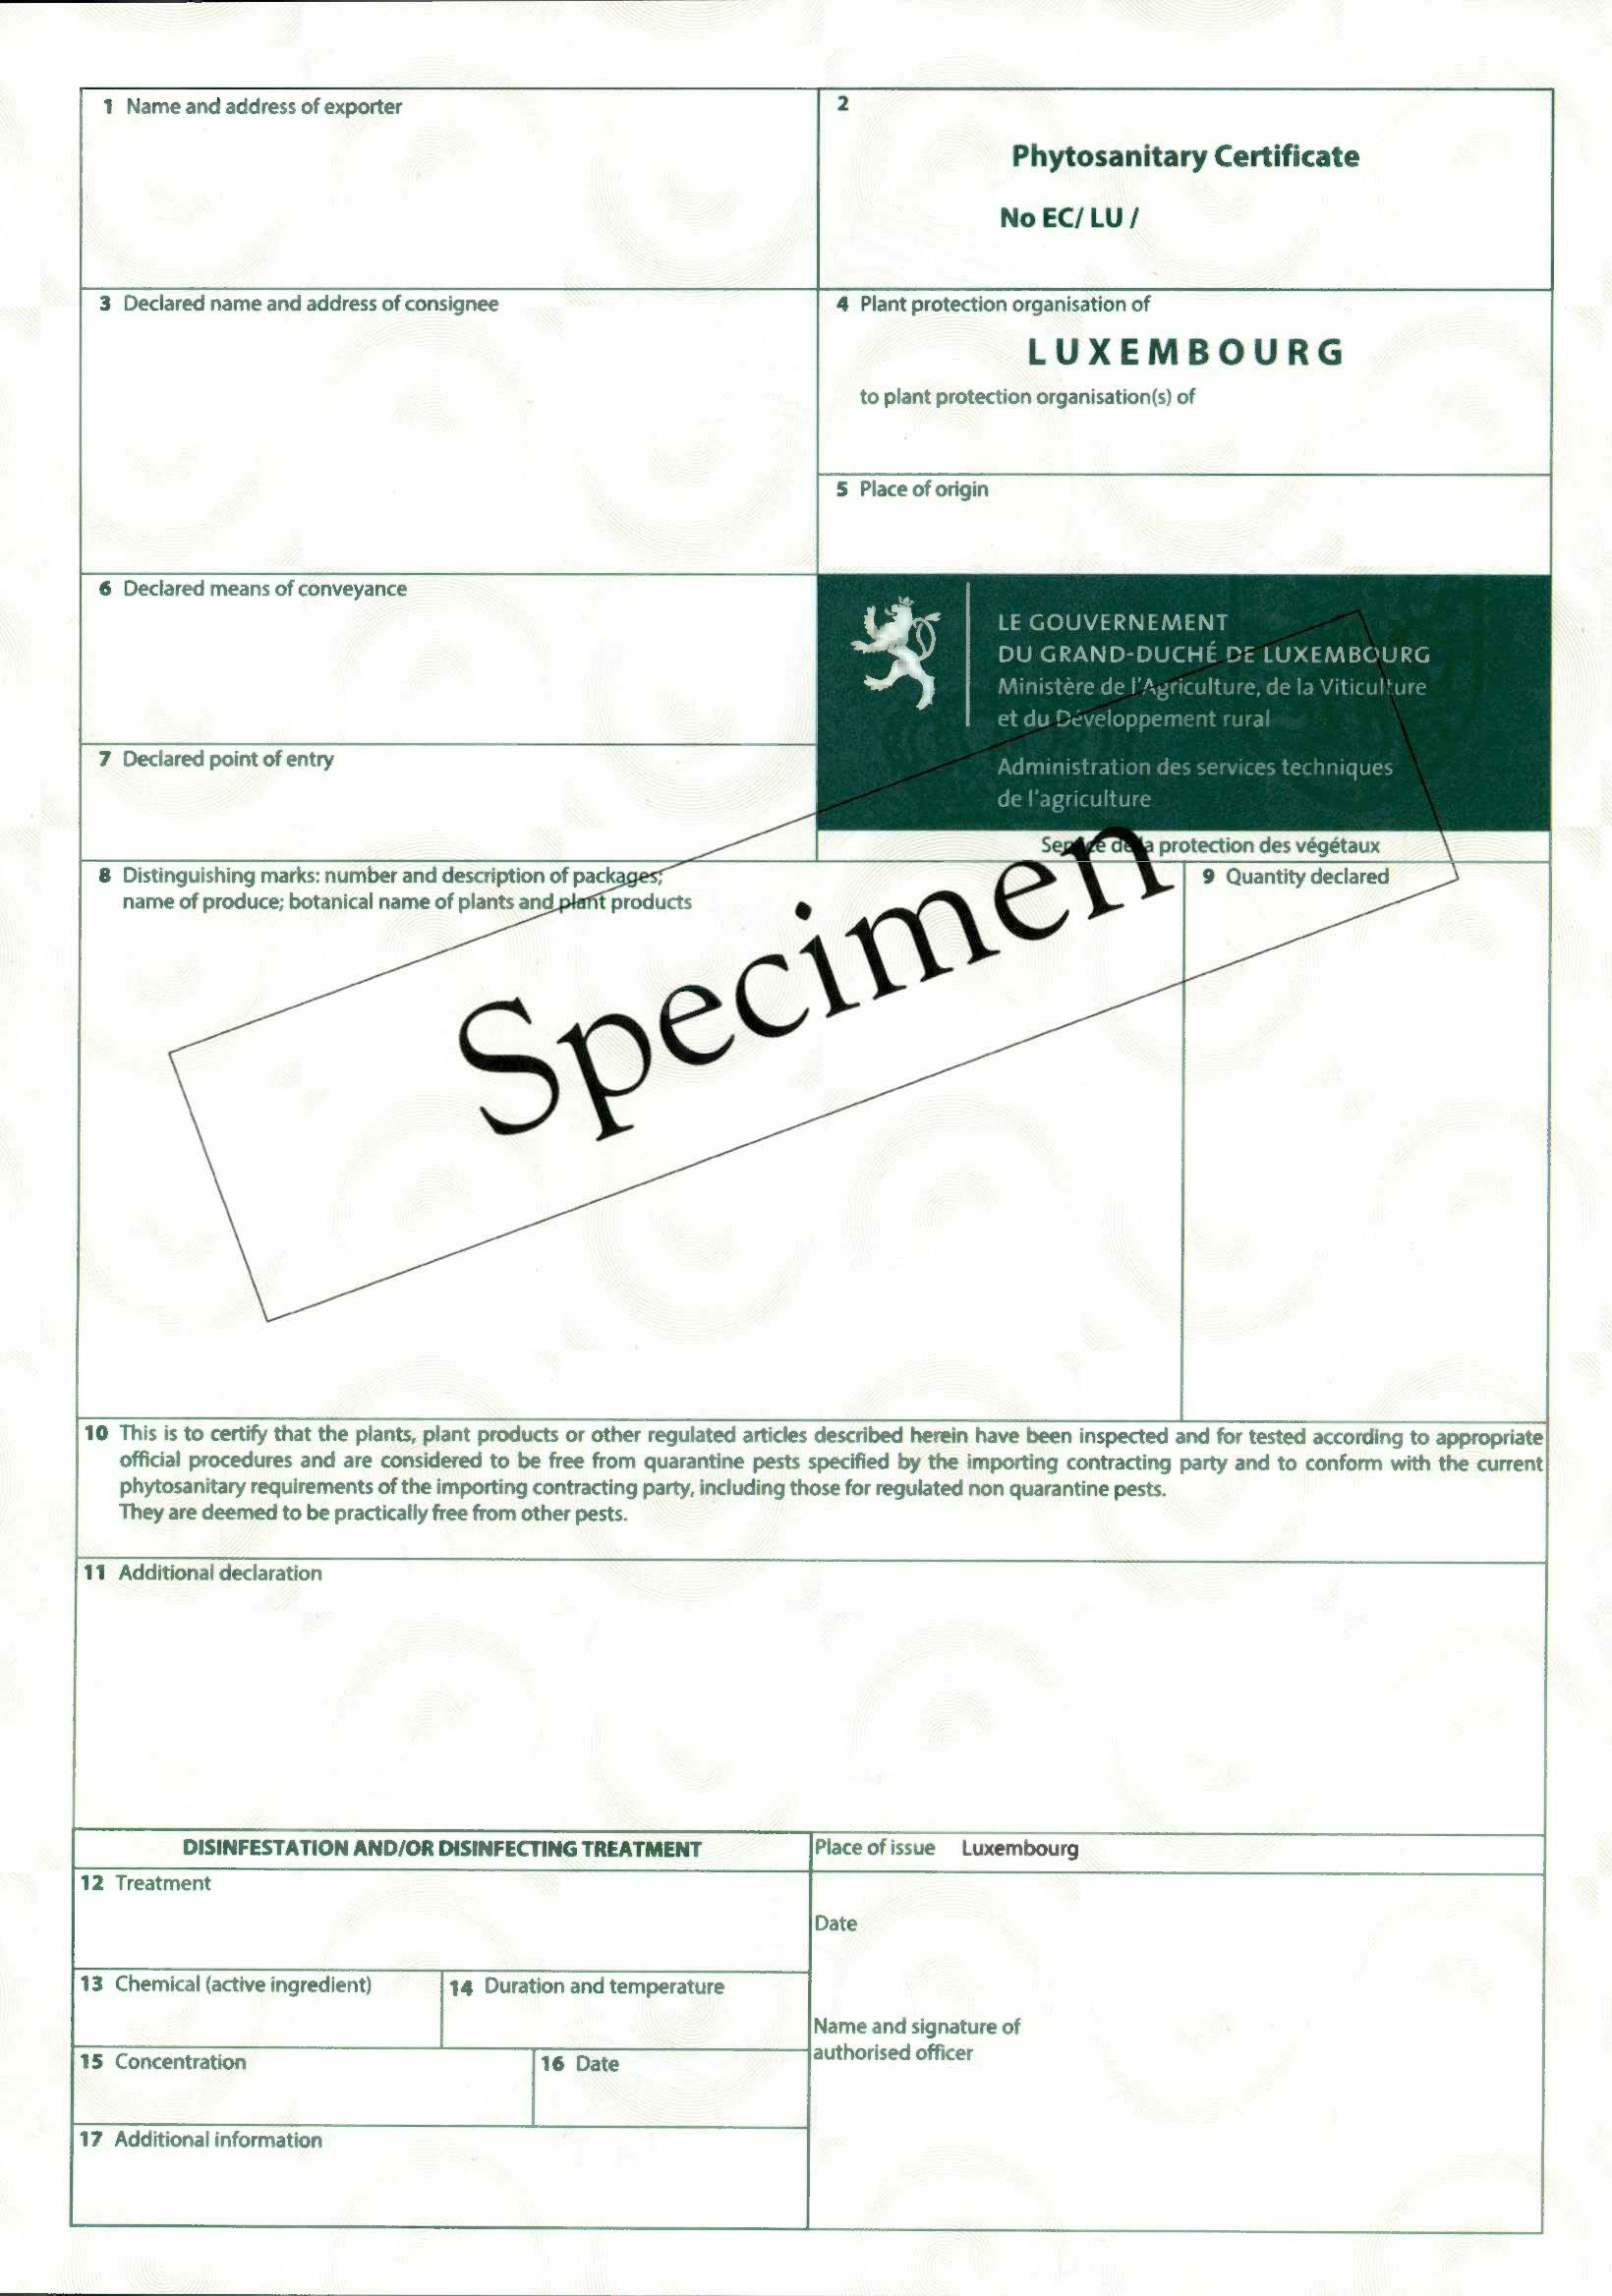 This picture represents a phytosanitary certificate for the export of plants or plants products v2023